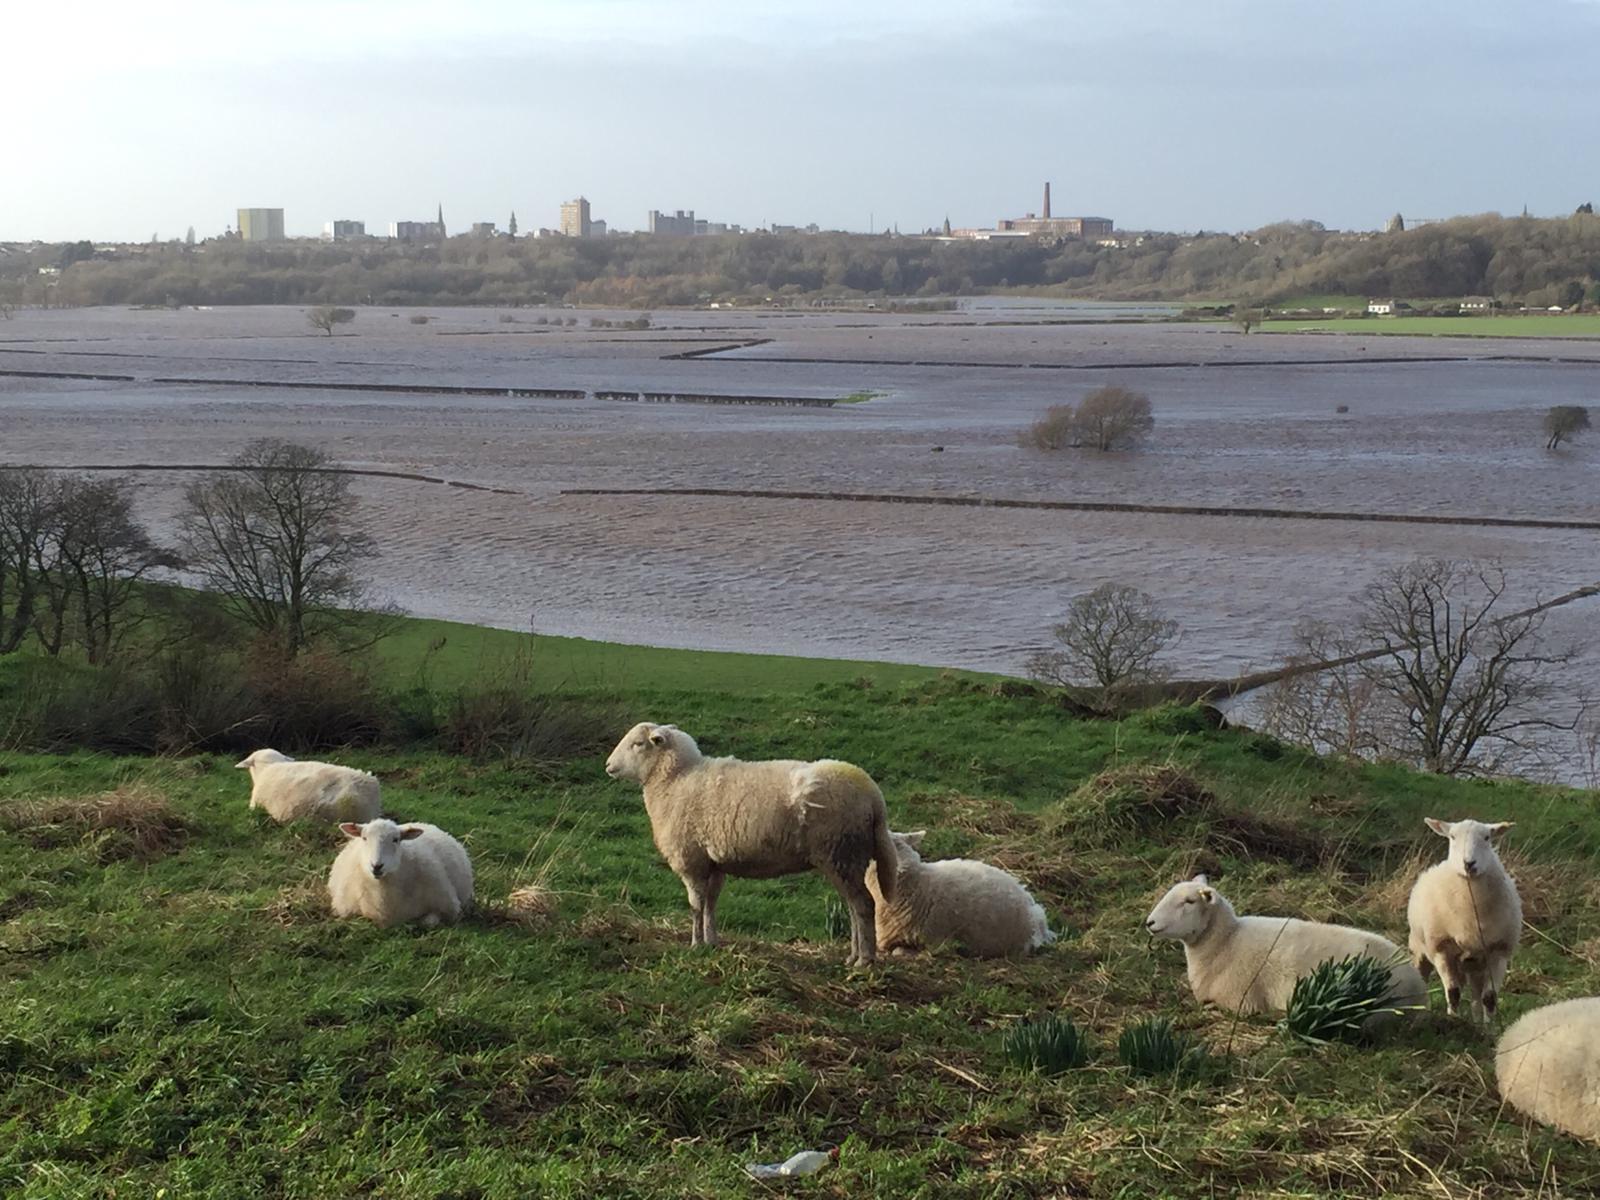 View of Preston across the high water levels of the River Ribble.